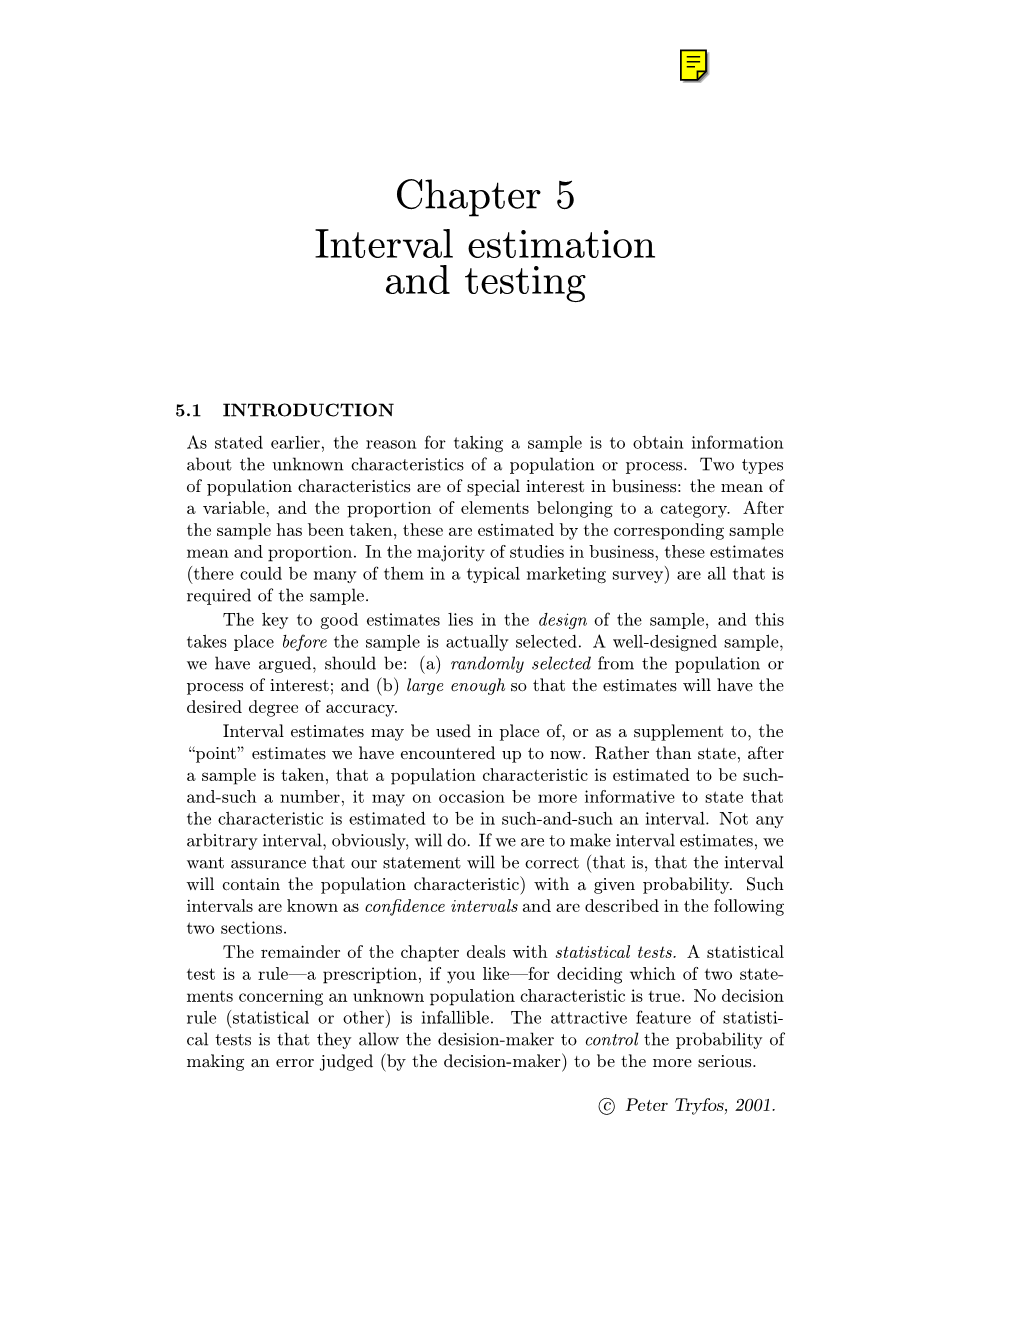 Chapter 5 Interval Estimation and Testing